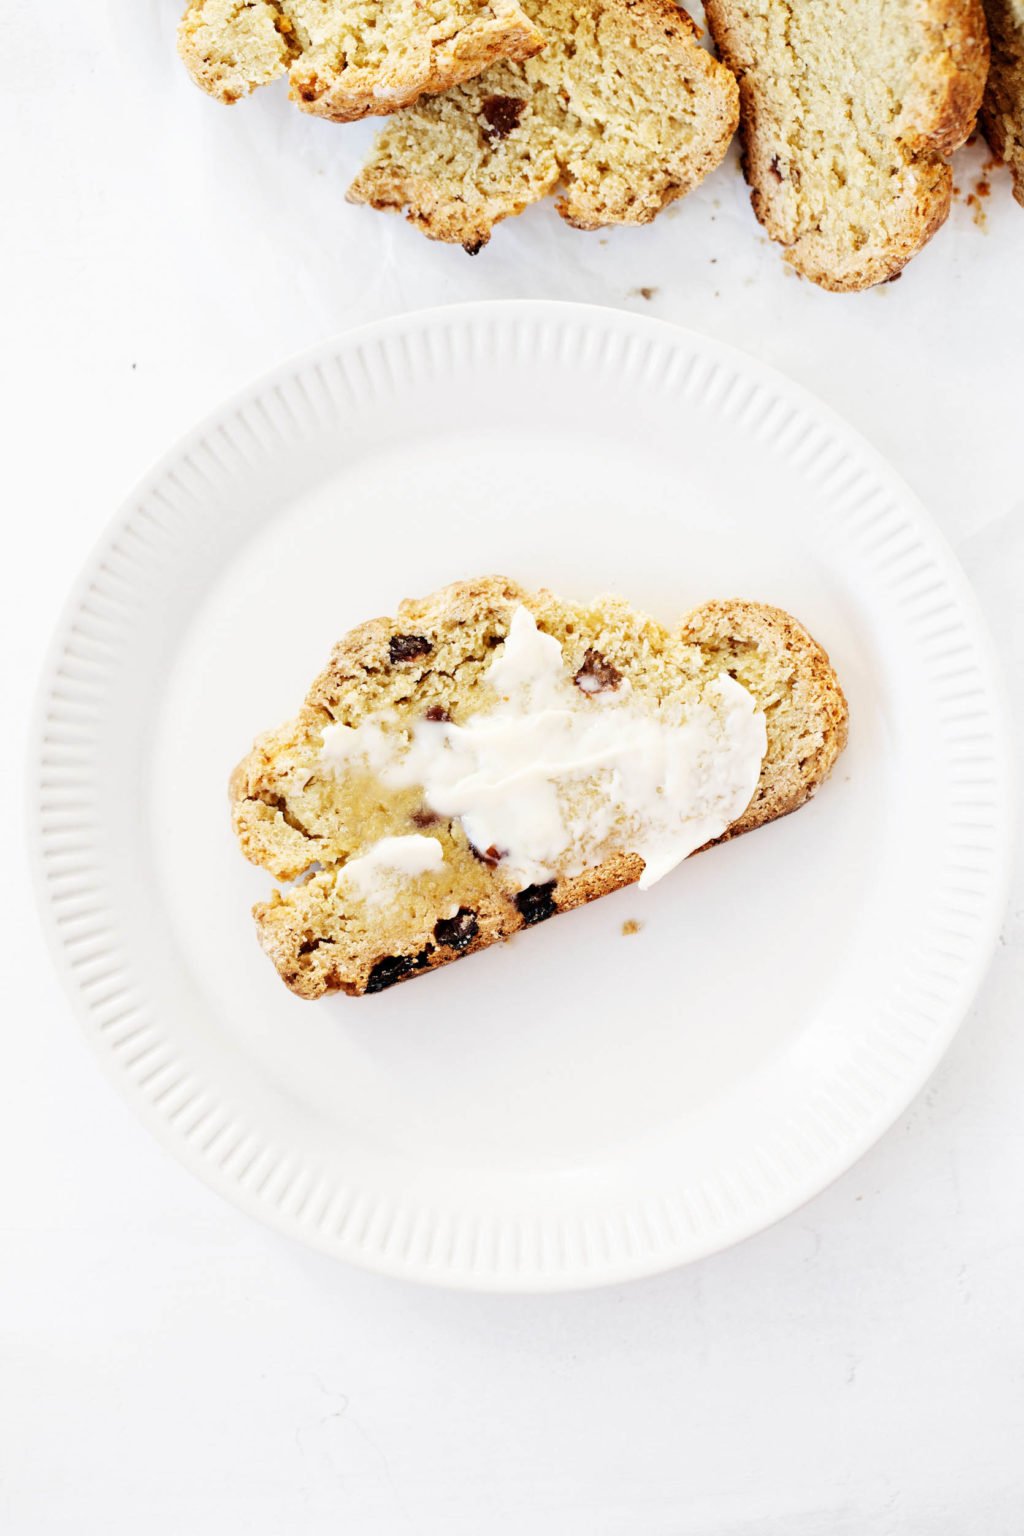 A small slice of vegan Irish soda bread has been topped with butter and served on a fluted white plate.